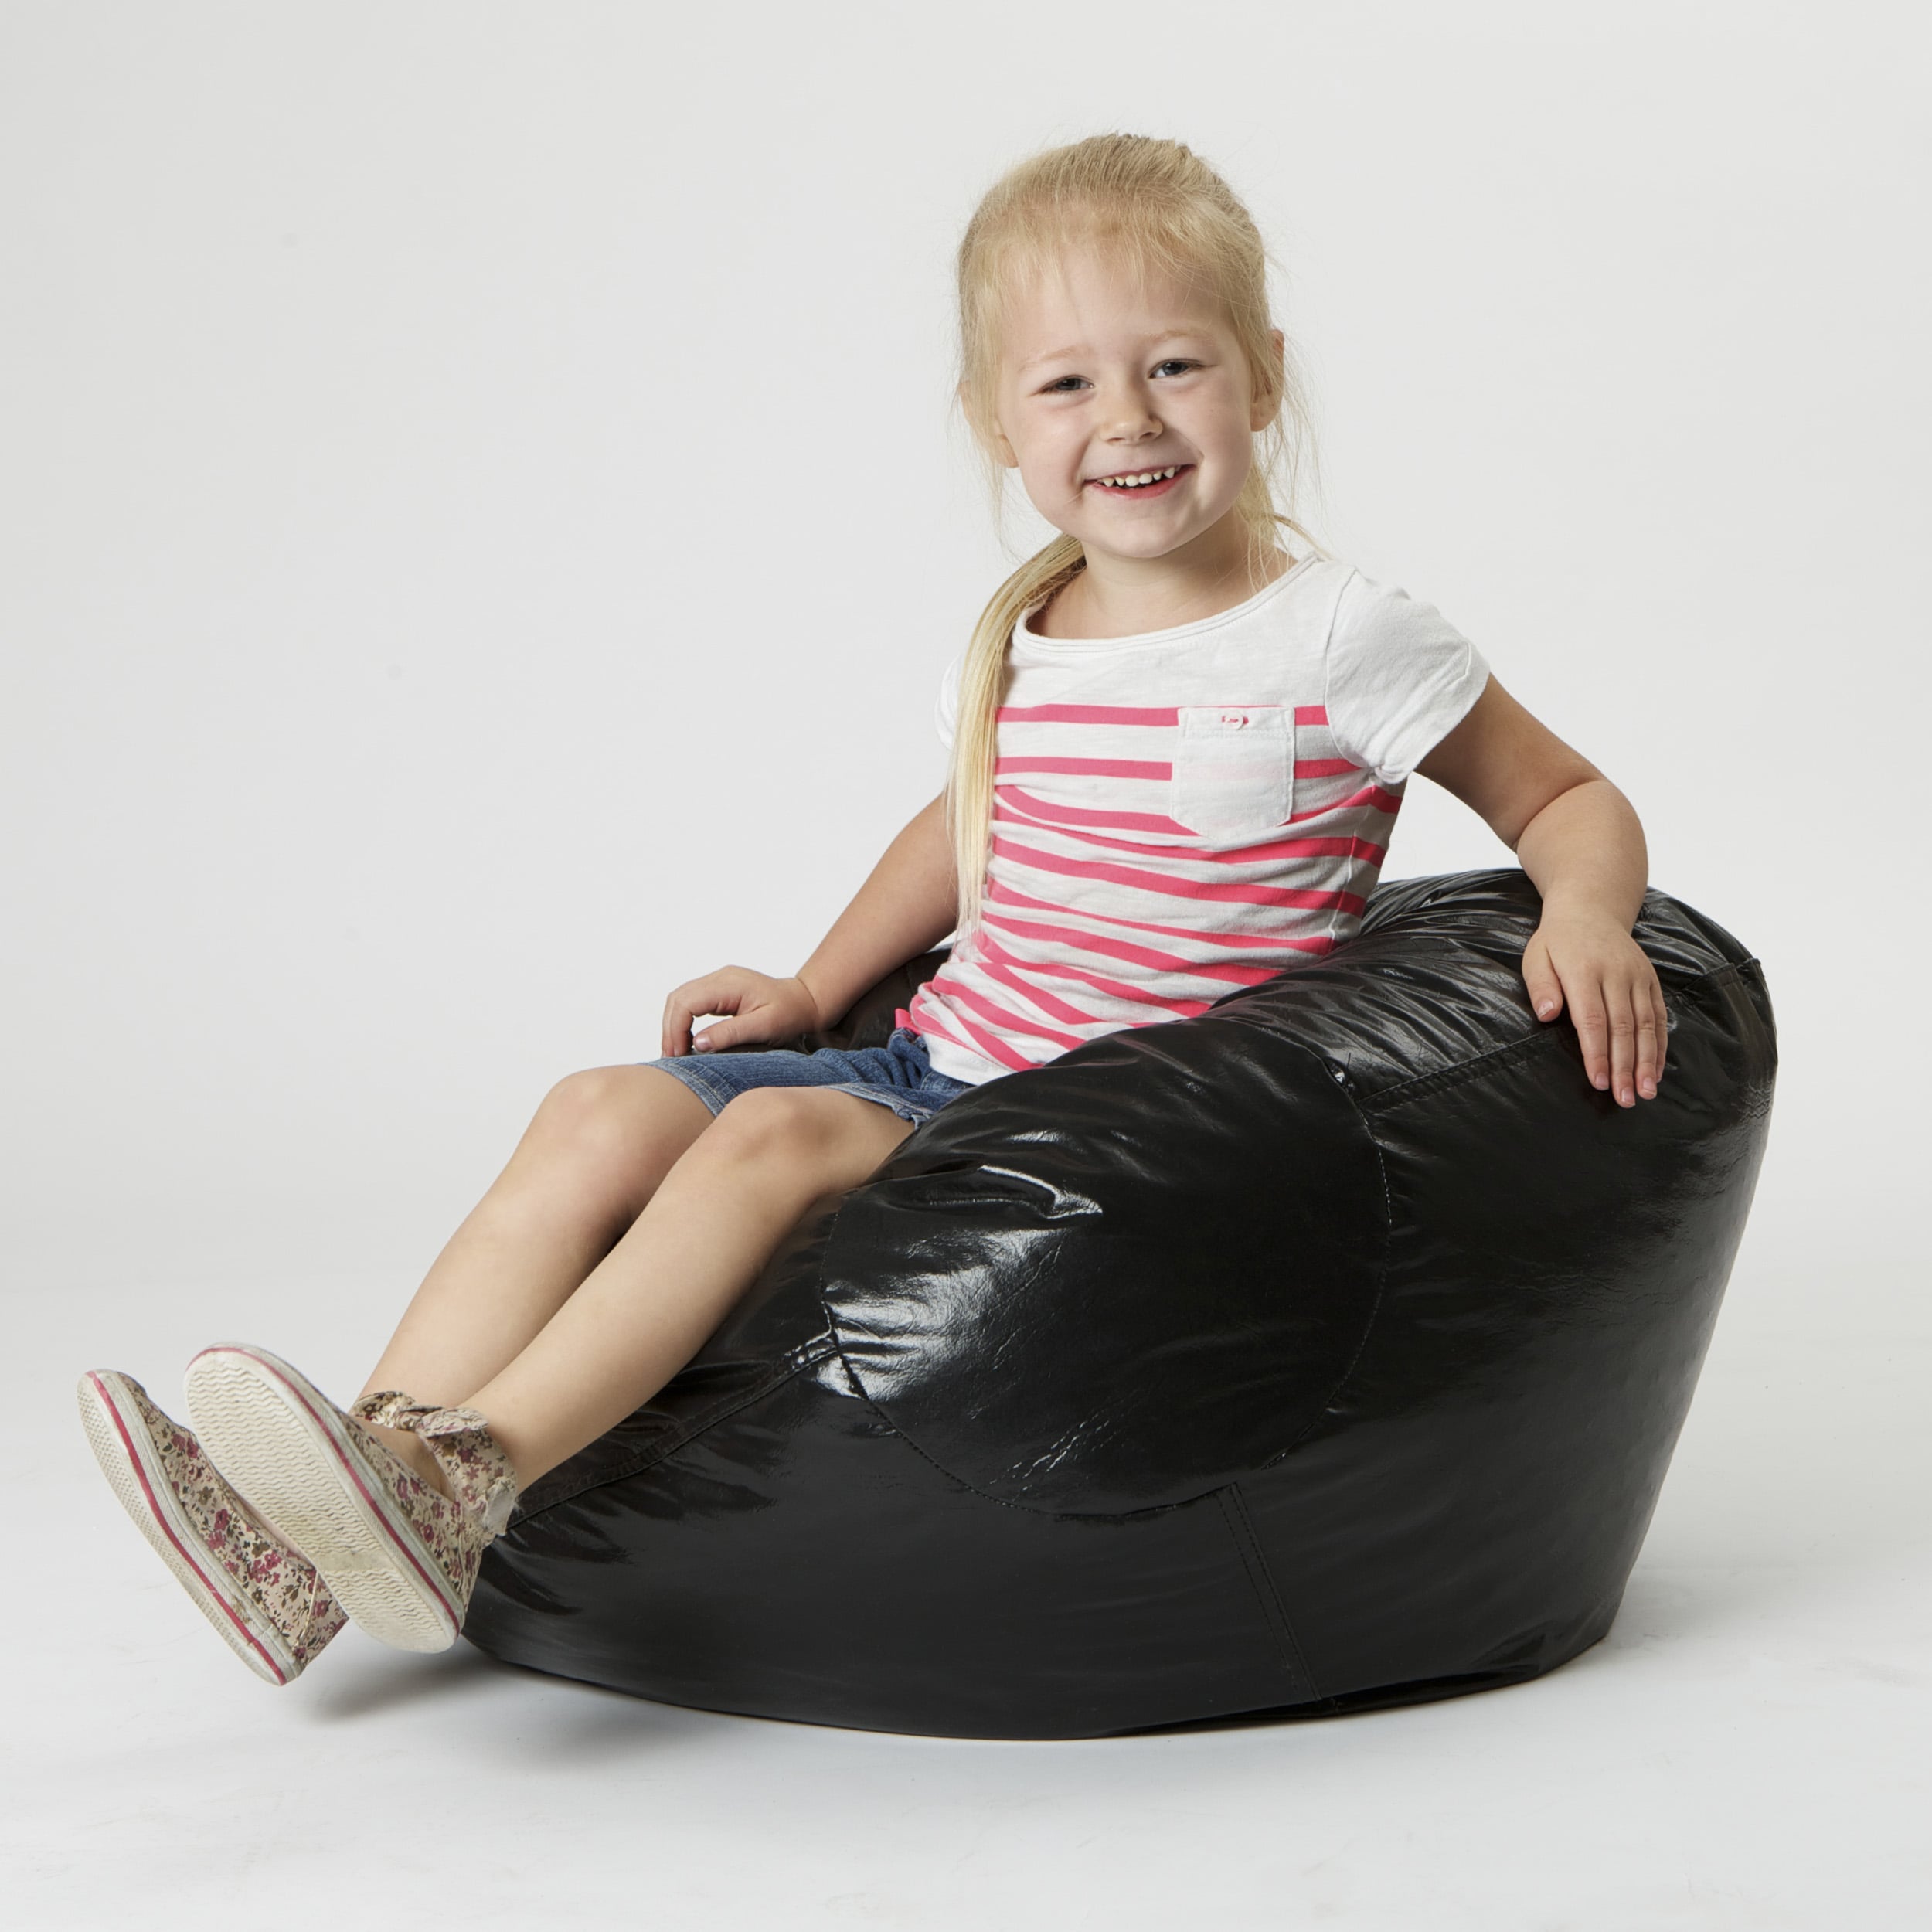 child size lounge chair